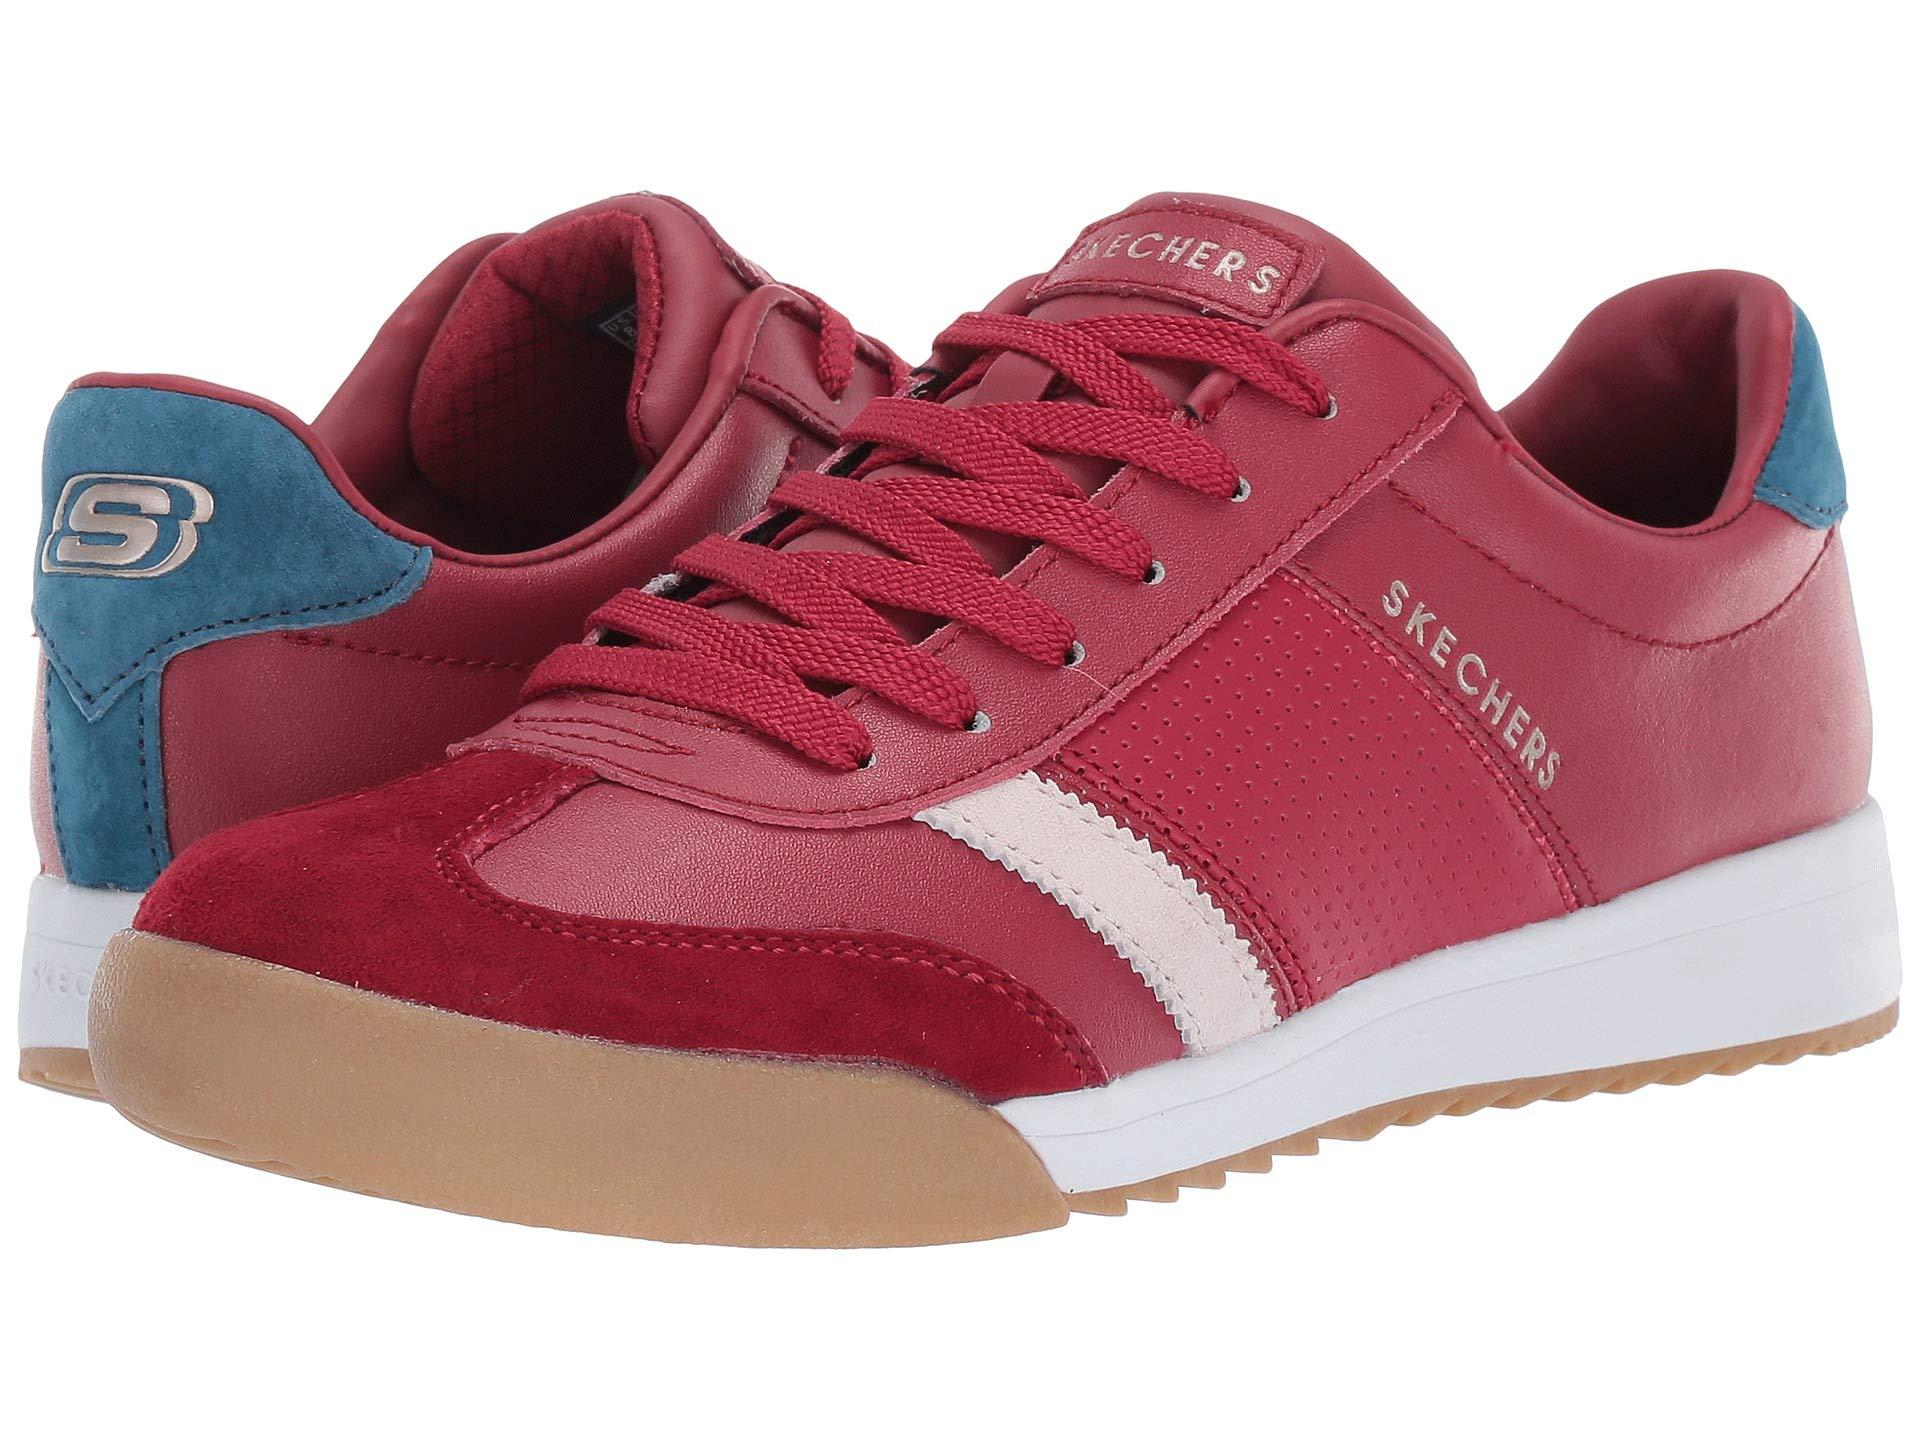 imply produce hostage Skechers Zinger - Retro Rockers in Red | Lyst